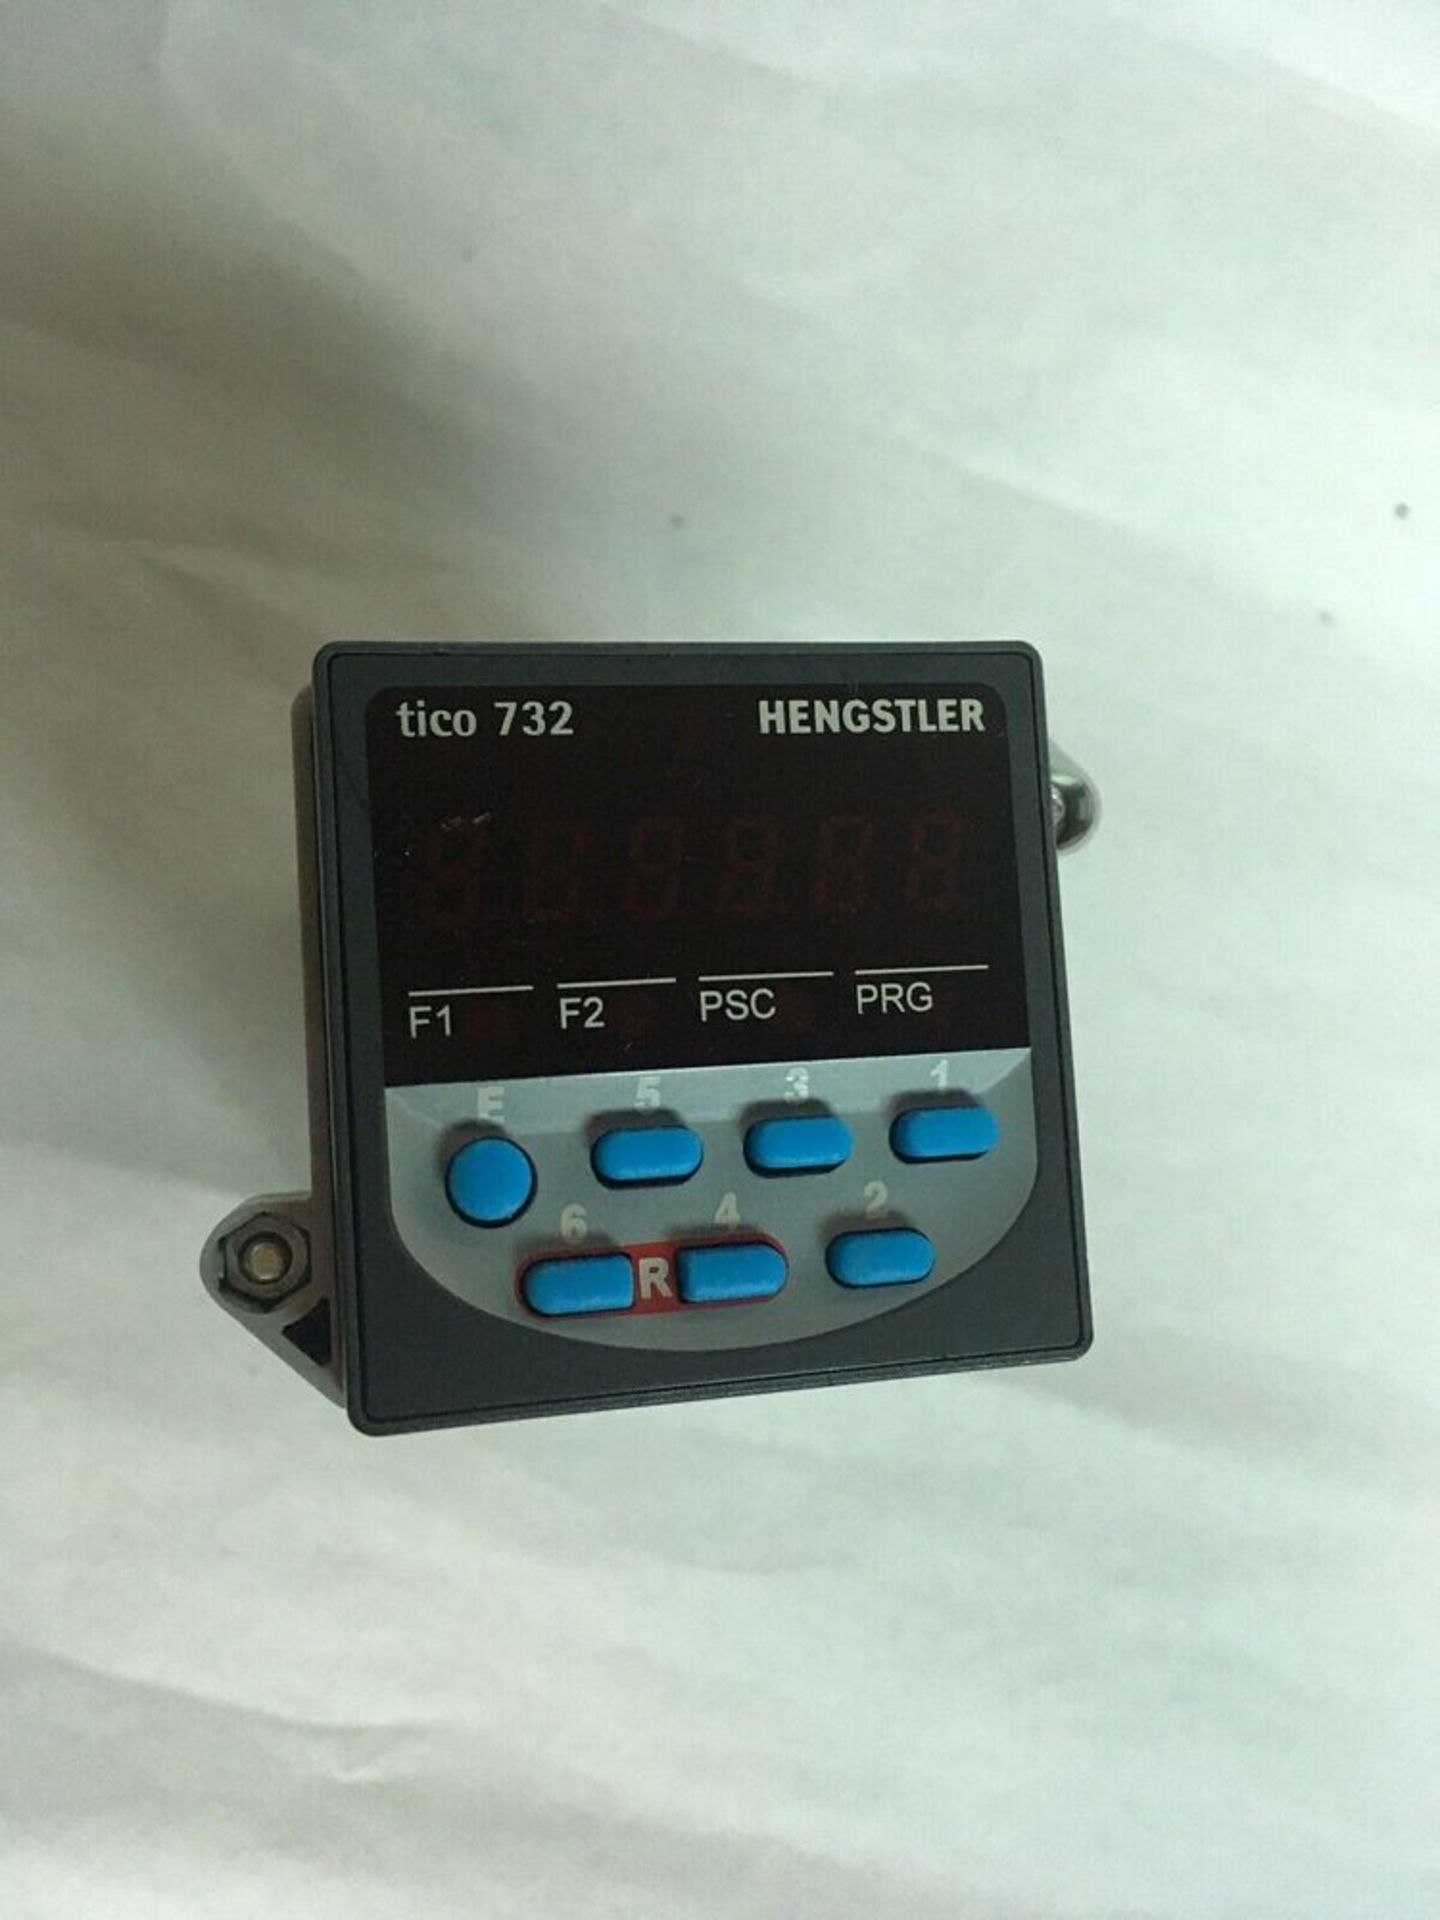 Hengstler Tico 732 Multifunction Counter - Image 2 of 3